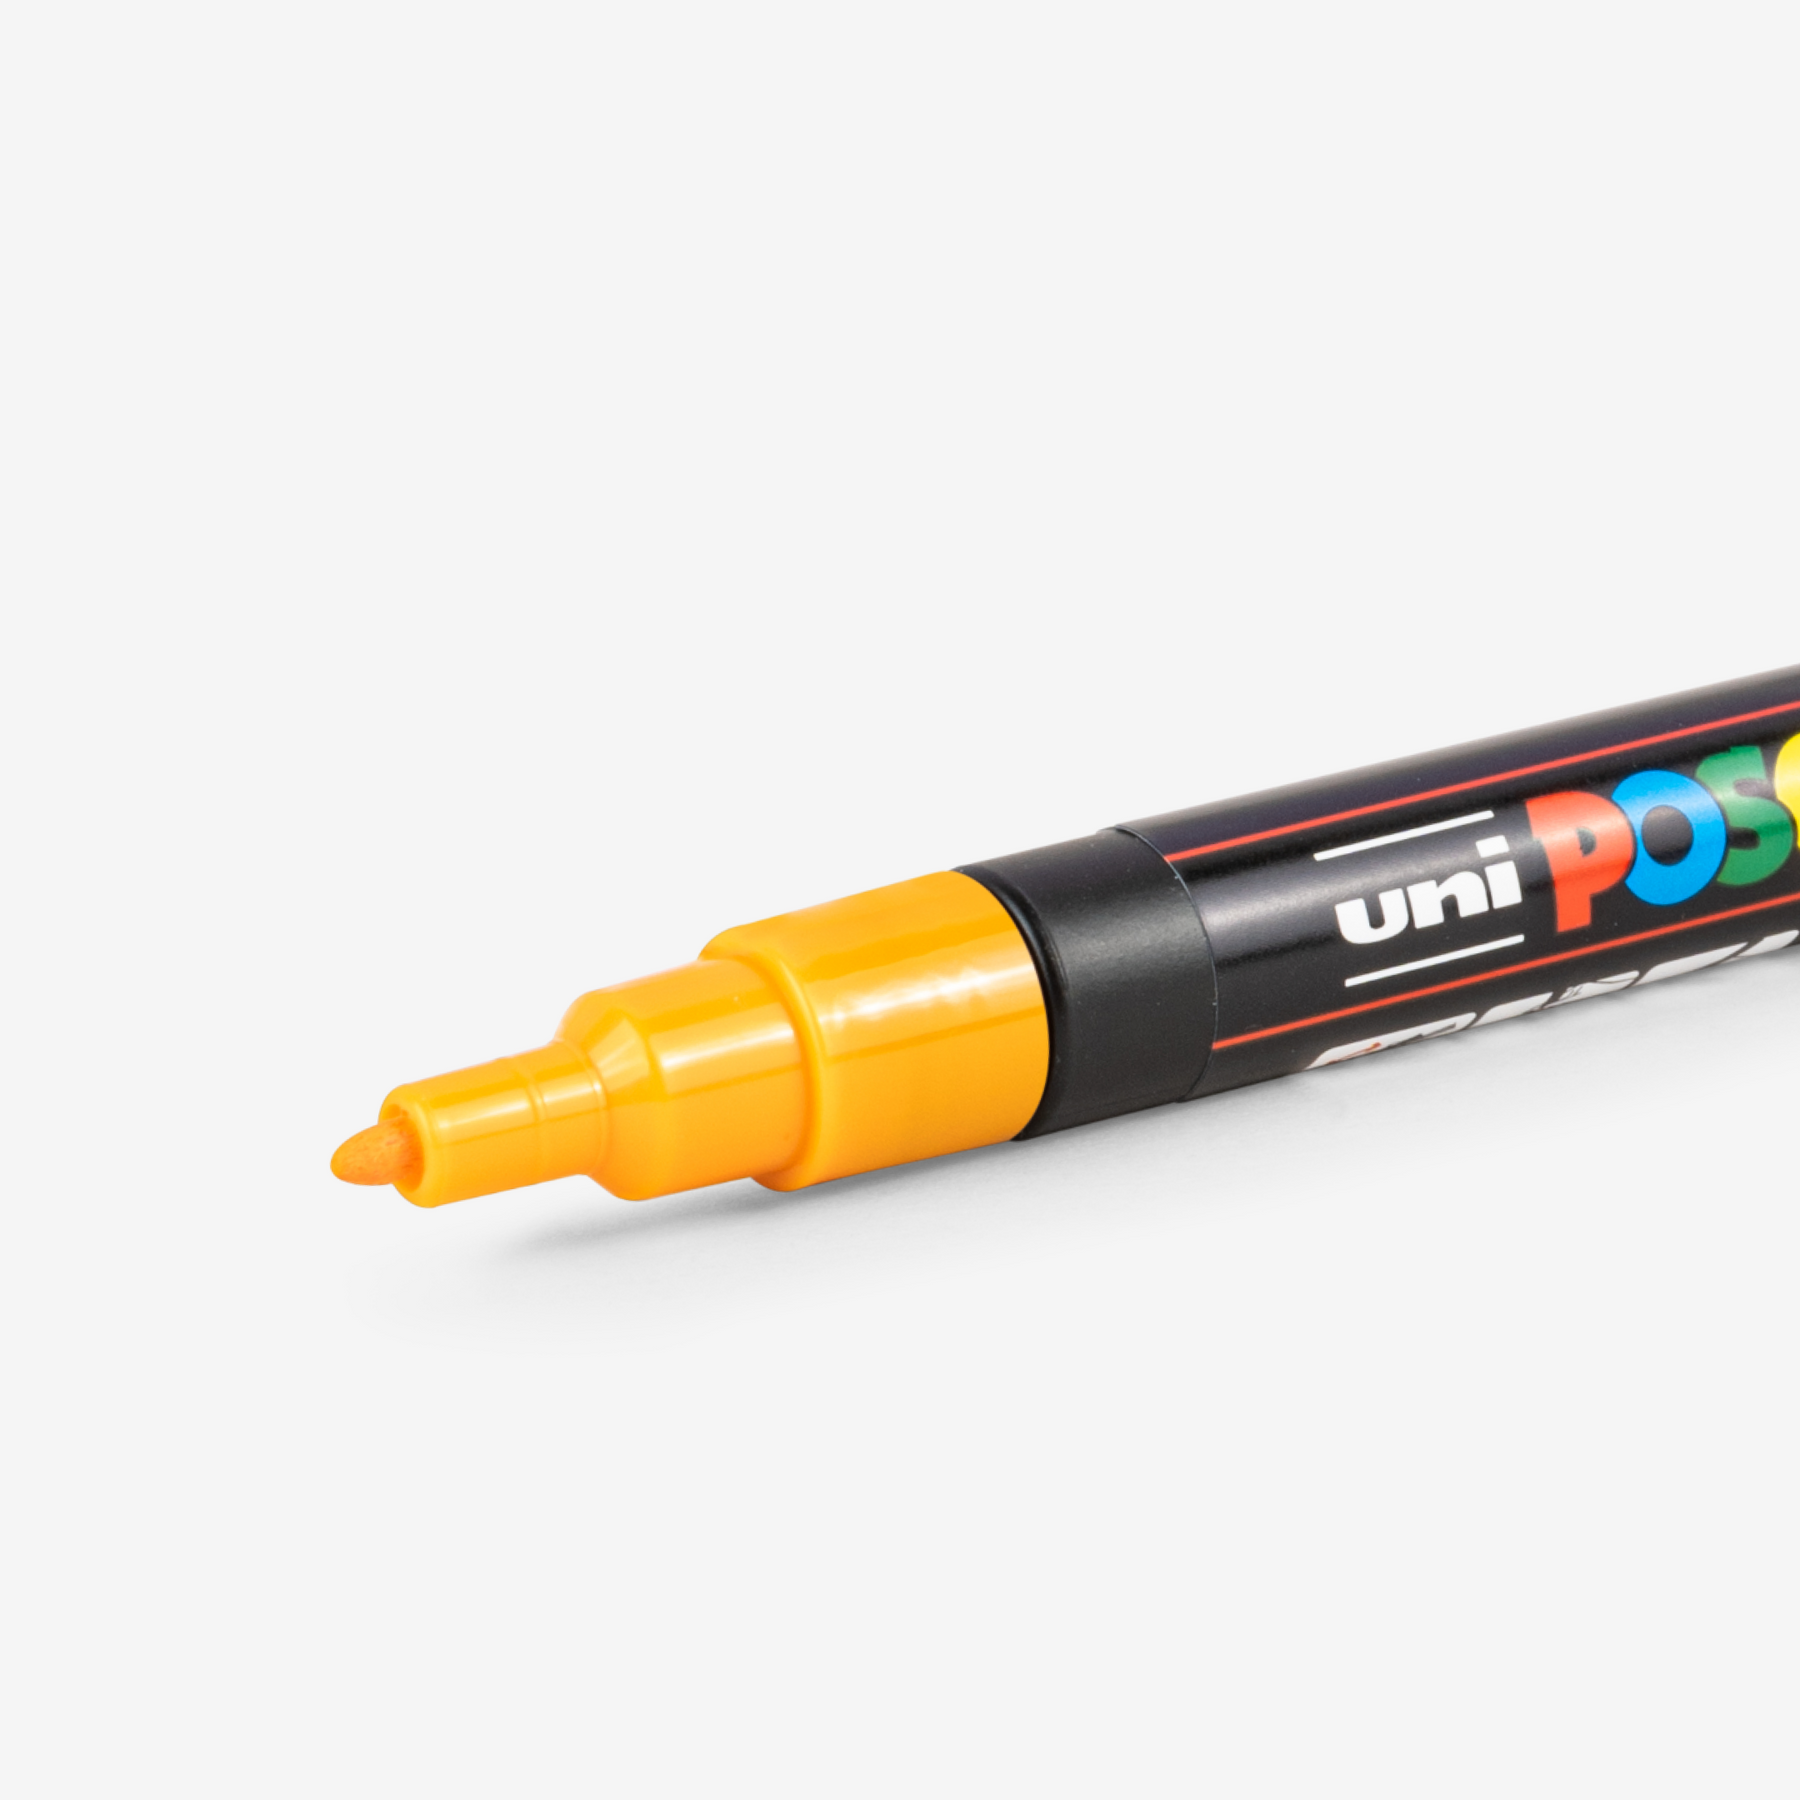 uni® Posca PC-3M Paint Markers - Fine Marker Point - Green, Blue, Light  Blue, Yellow, Red, Pink, White, Black Water Based, Pigment-based Ink - 8 /  Pack - Thomas Business Center Inc